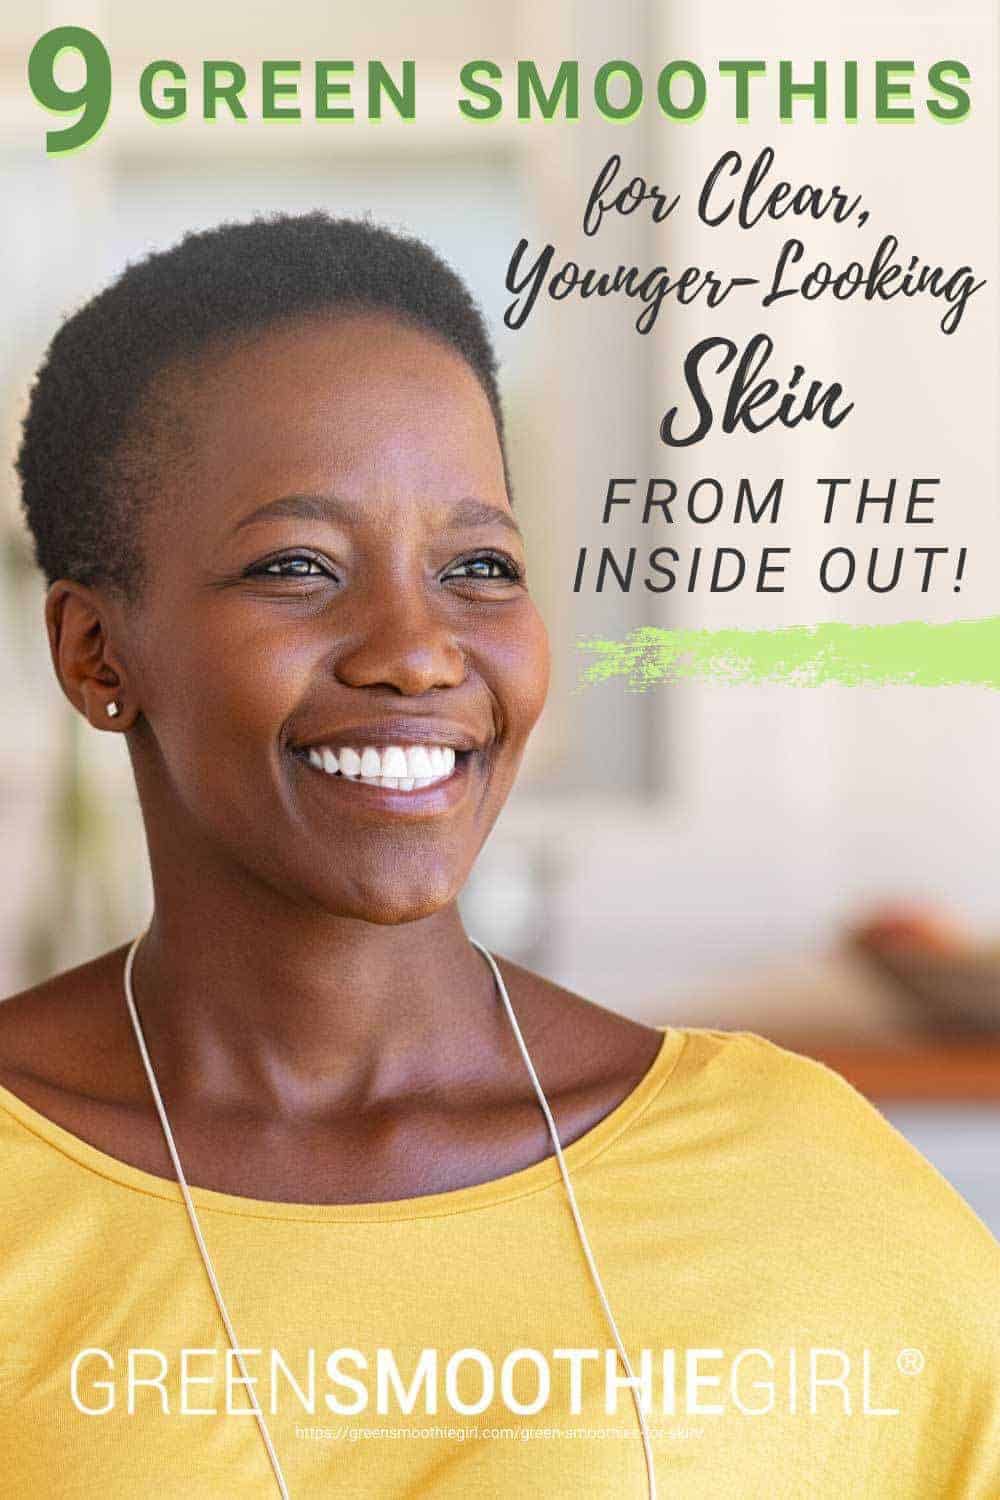 Photo of smiling African American woman in yellow shirt with post's title text overlaid from "9 Green Smoothies For Clear, Younger-Looking Skin From The Inside Out" blog post by Green Smoothie Girl